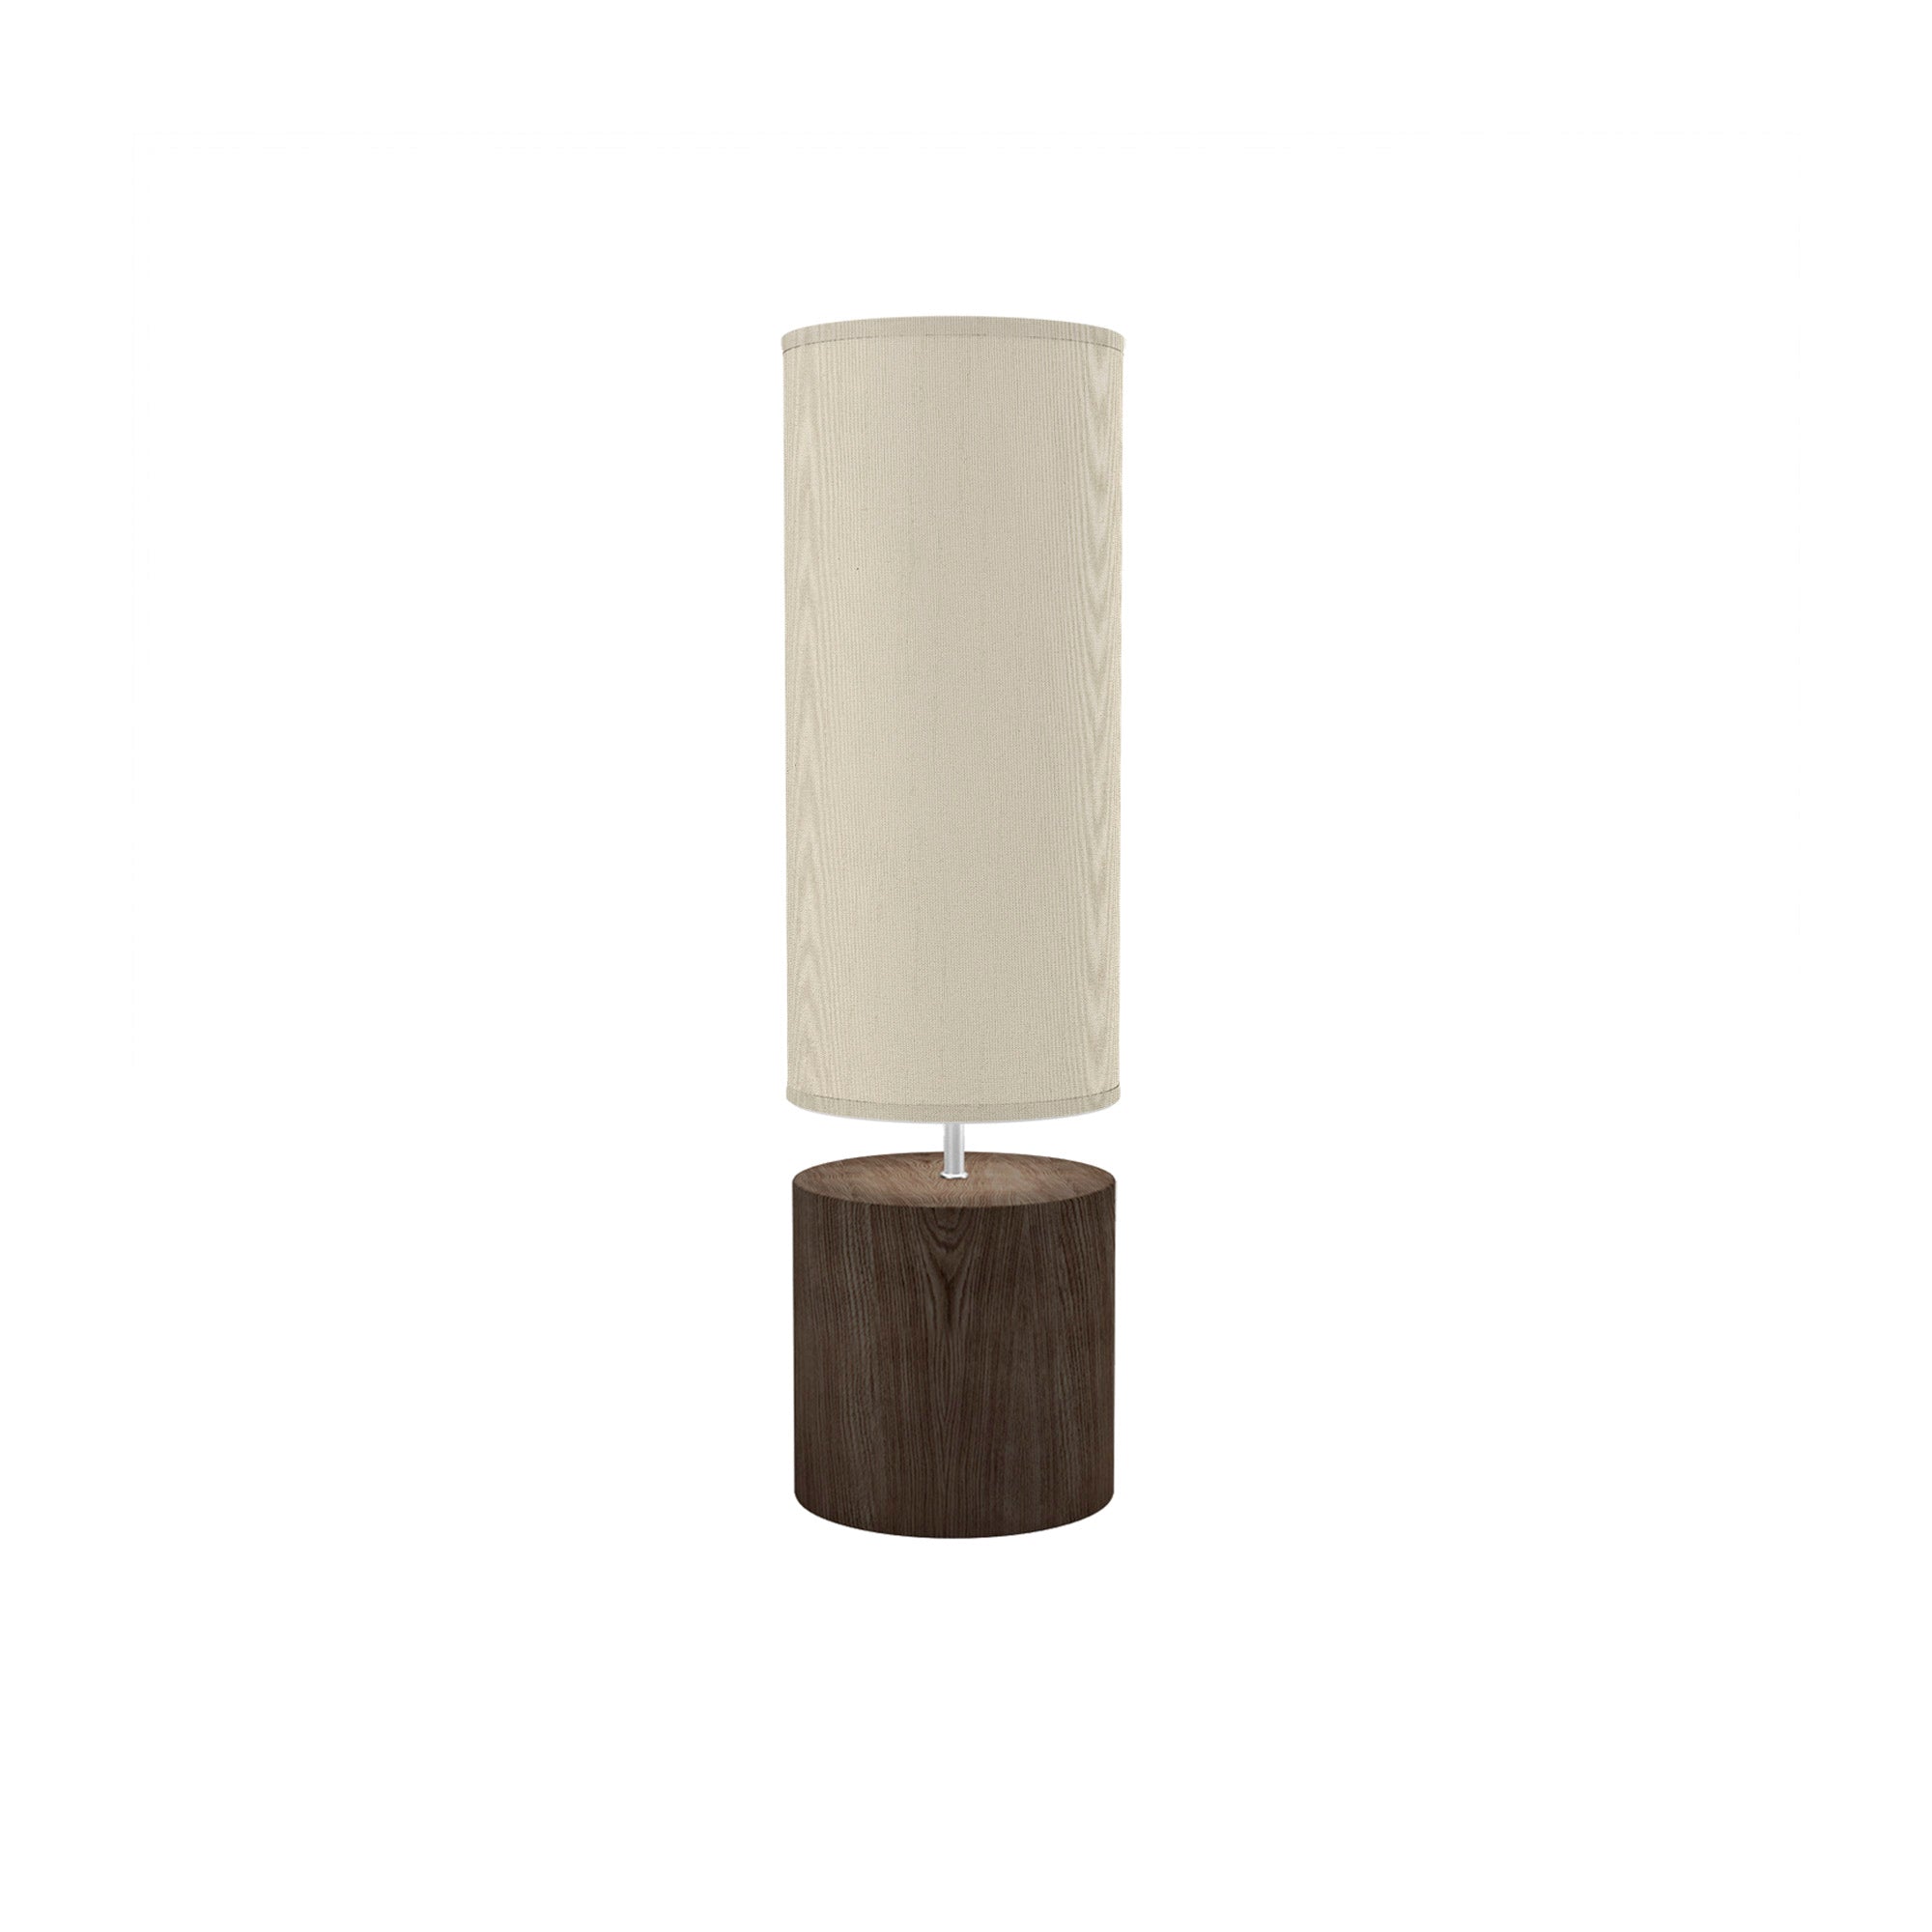 The Laurie Table Lamp from Seascape Fixtures with the walnut base with silk shade in cream color.